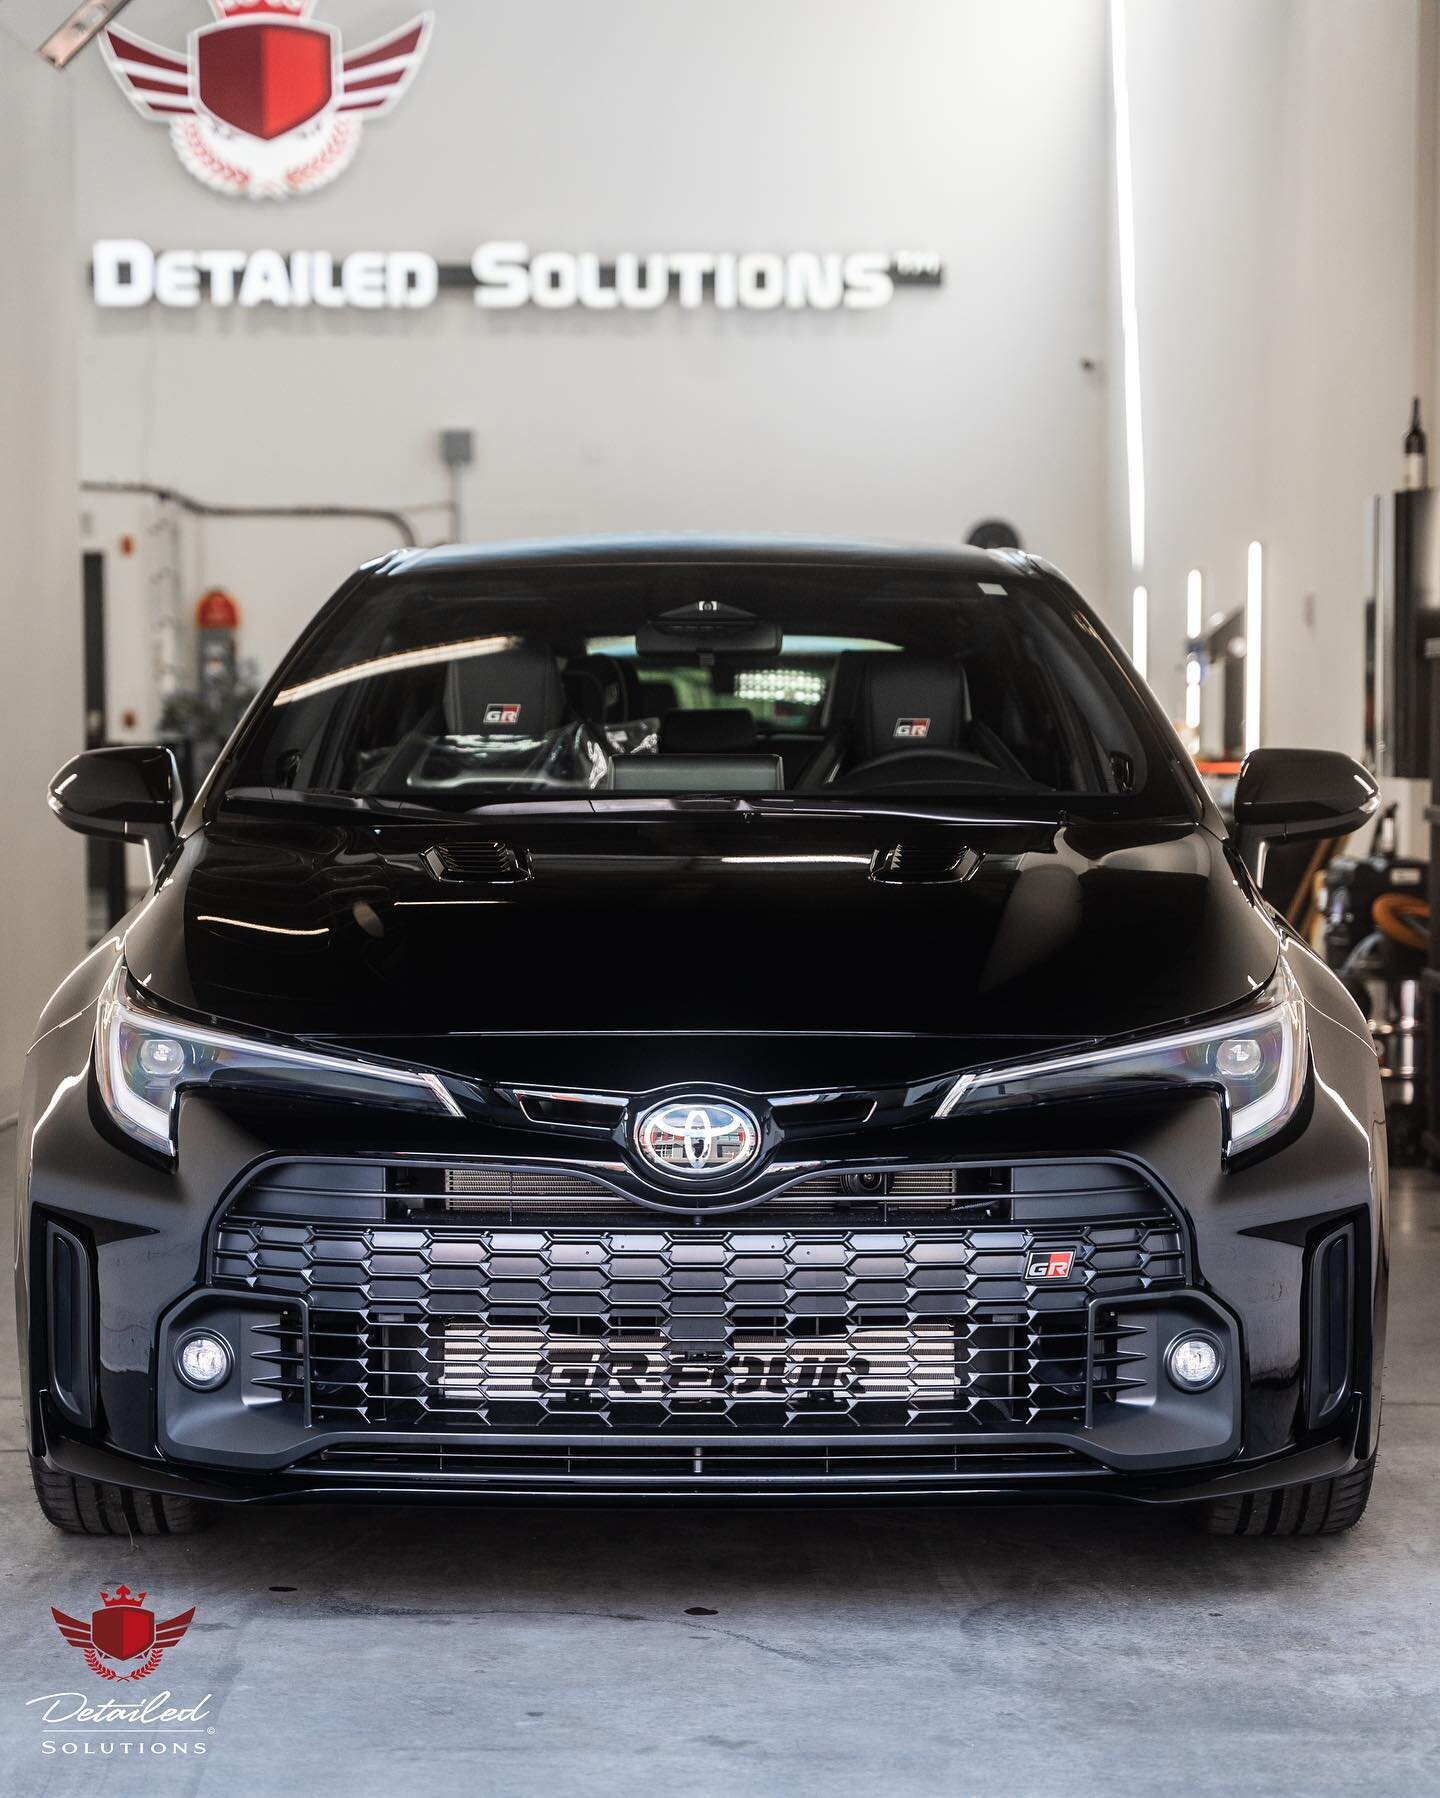 🏁Brand new #GR Corolla (circuit edition) protected with Film Solutions&trade; PPF
➖
☑️ Self-healing
☑️ #Durable (8 mils)
☑️ Flexible &amp; Stretchable
☑️ Hydrophobic Top Coat
☑️ High Gloss &amp; Satin Finishes
☑️ #Lifetime Warranty 
➖
Film Solutions